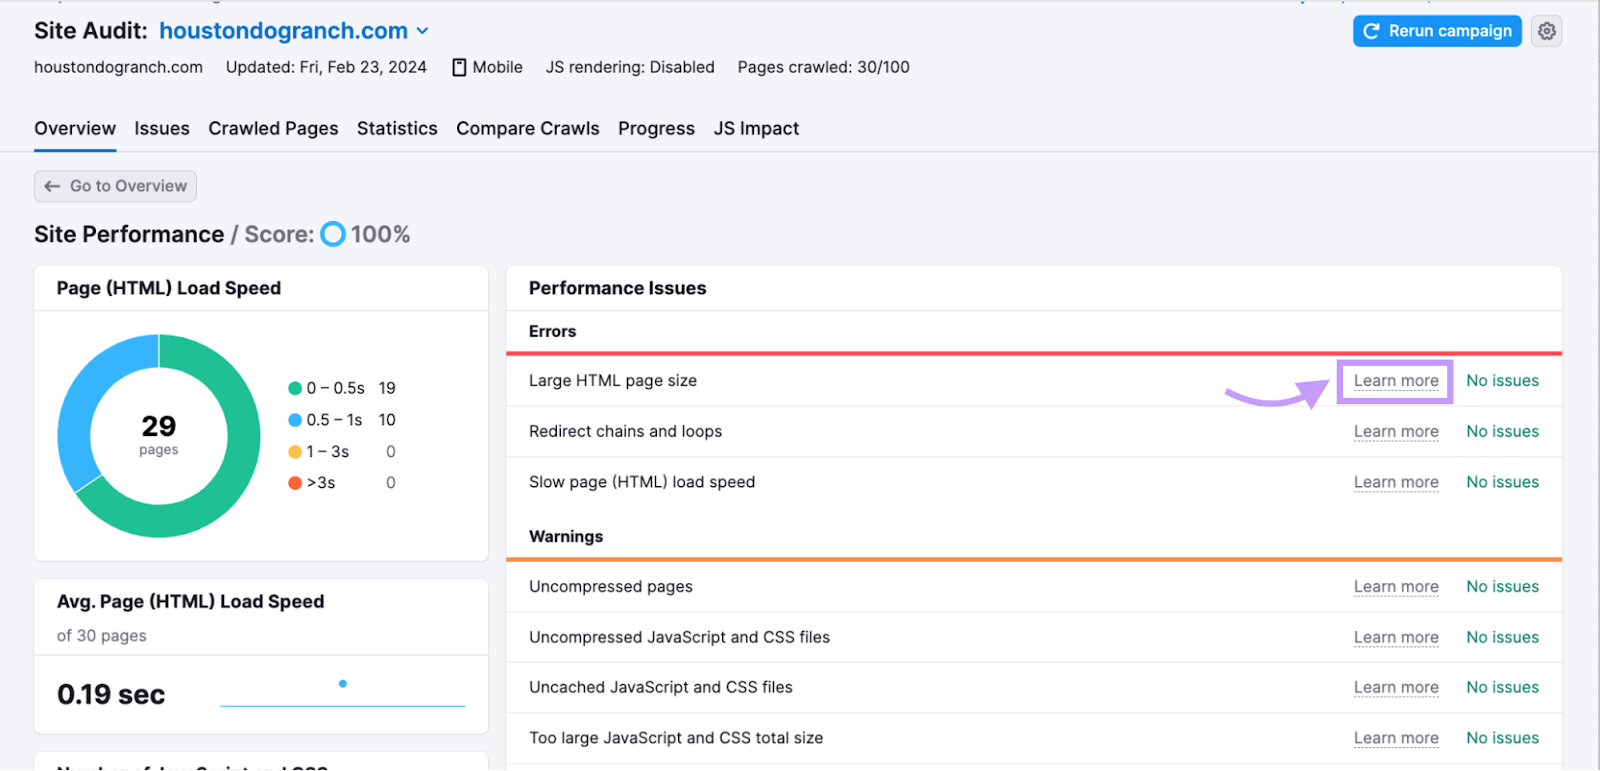 "Site Performance" study  successful  the Site Audit tool